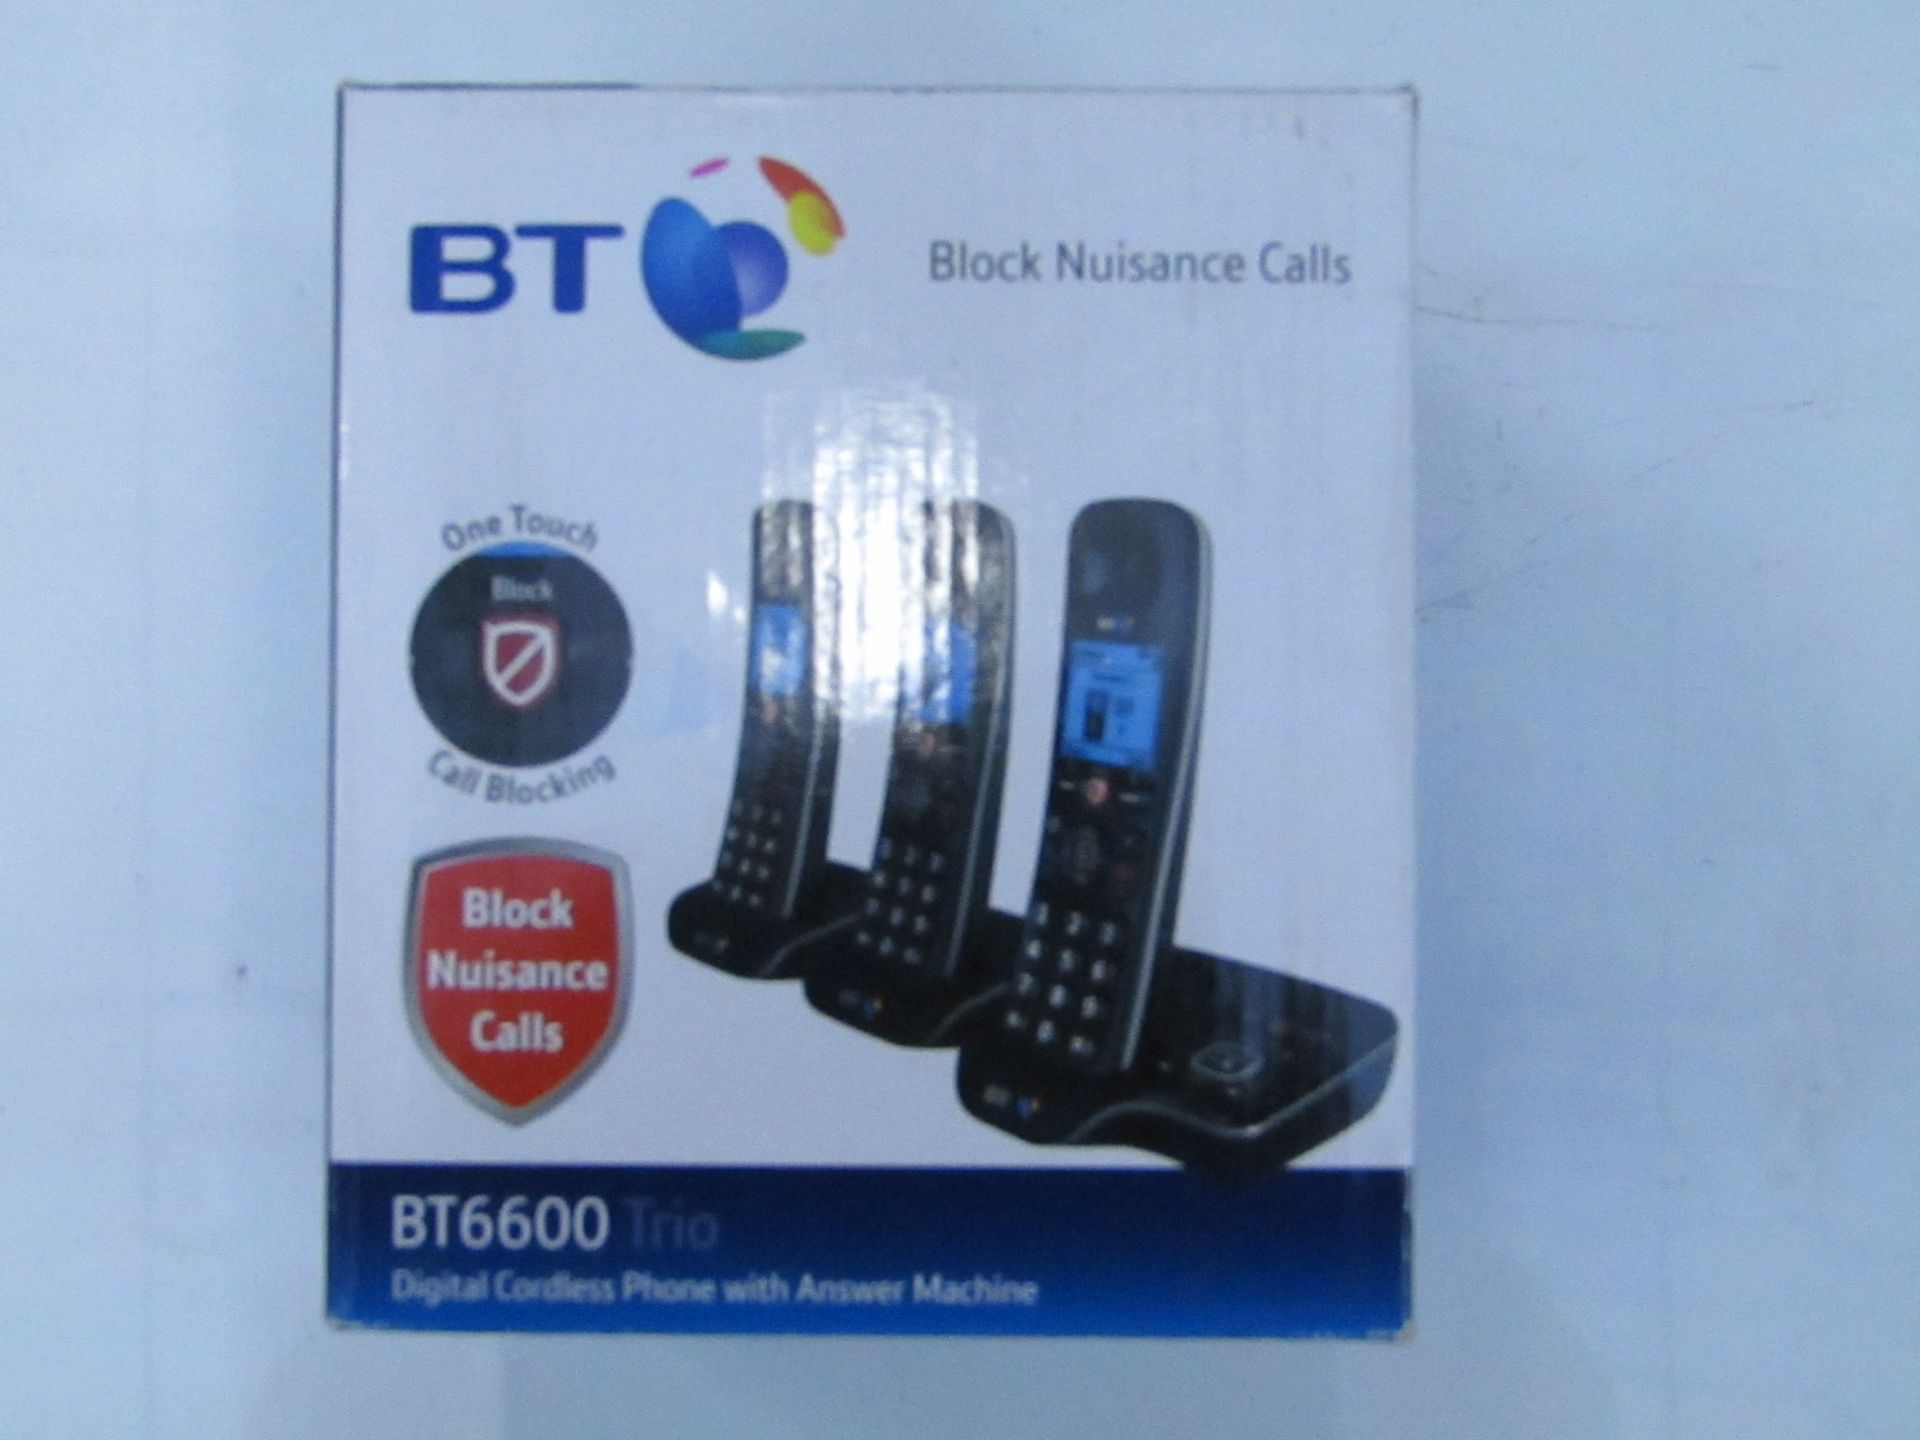 BT6600 Trio set of Cordless Digital telephone with call blocker, Boxed and Complete but unchecked